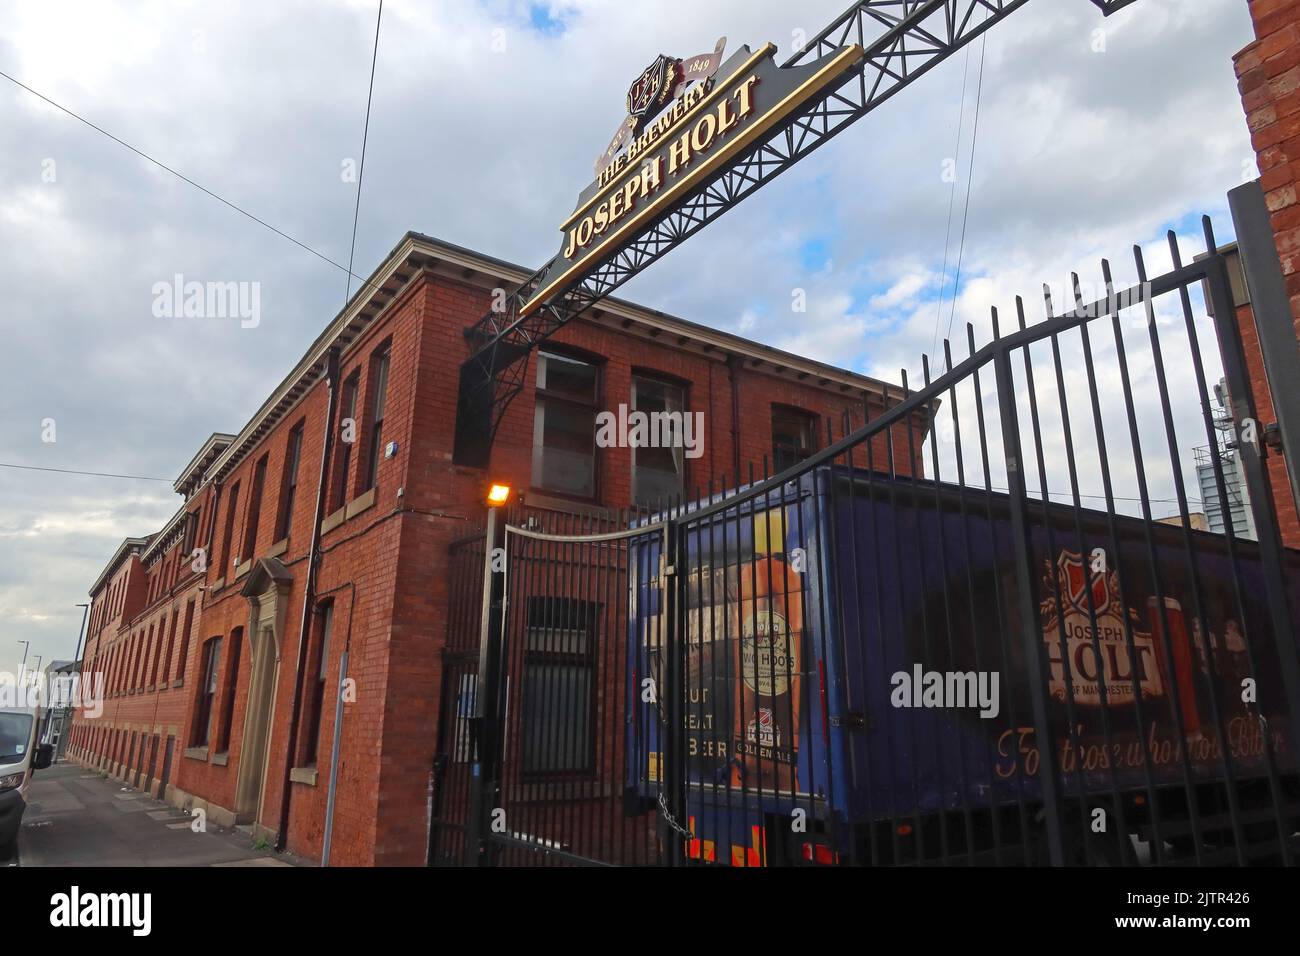 Joseph Holt Derby Brewery, Empire Street, Cheetham Hill, Manchester, Angleterre, Royaume-Uni, M3 1JD Banque D'Images